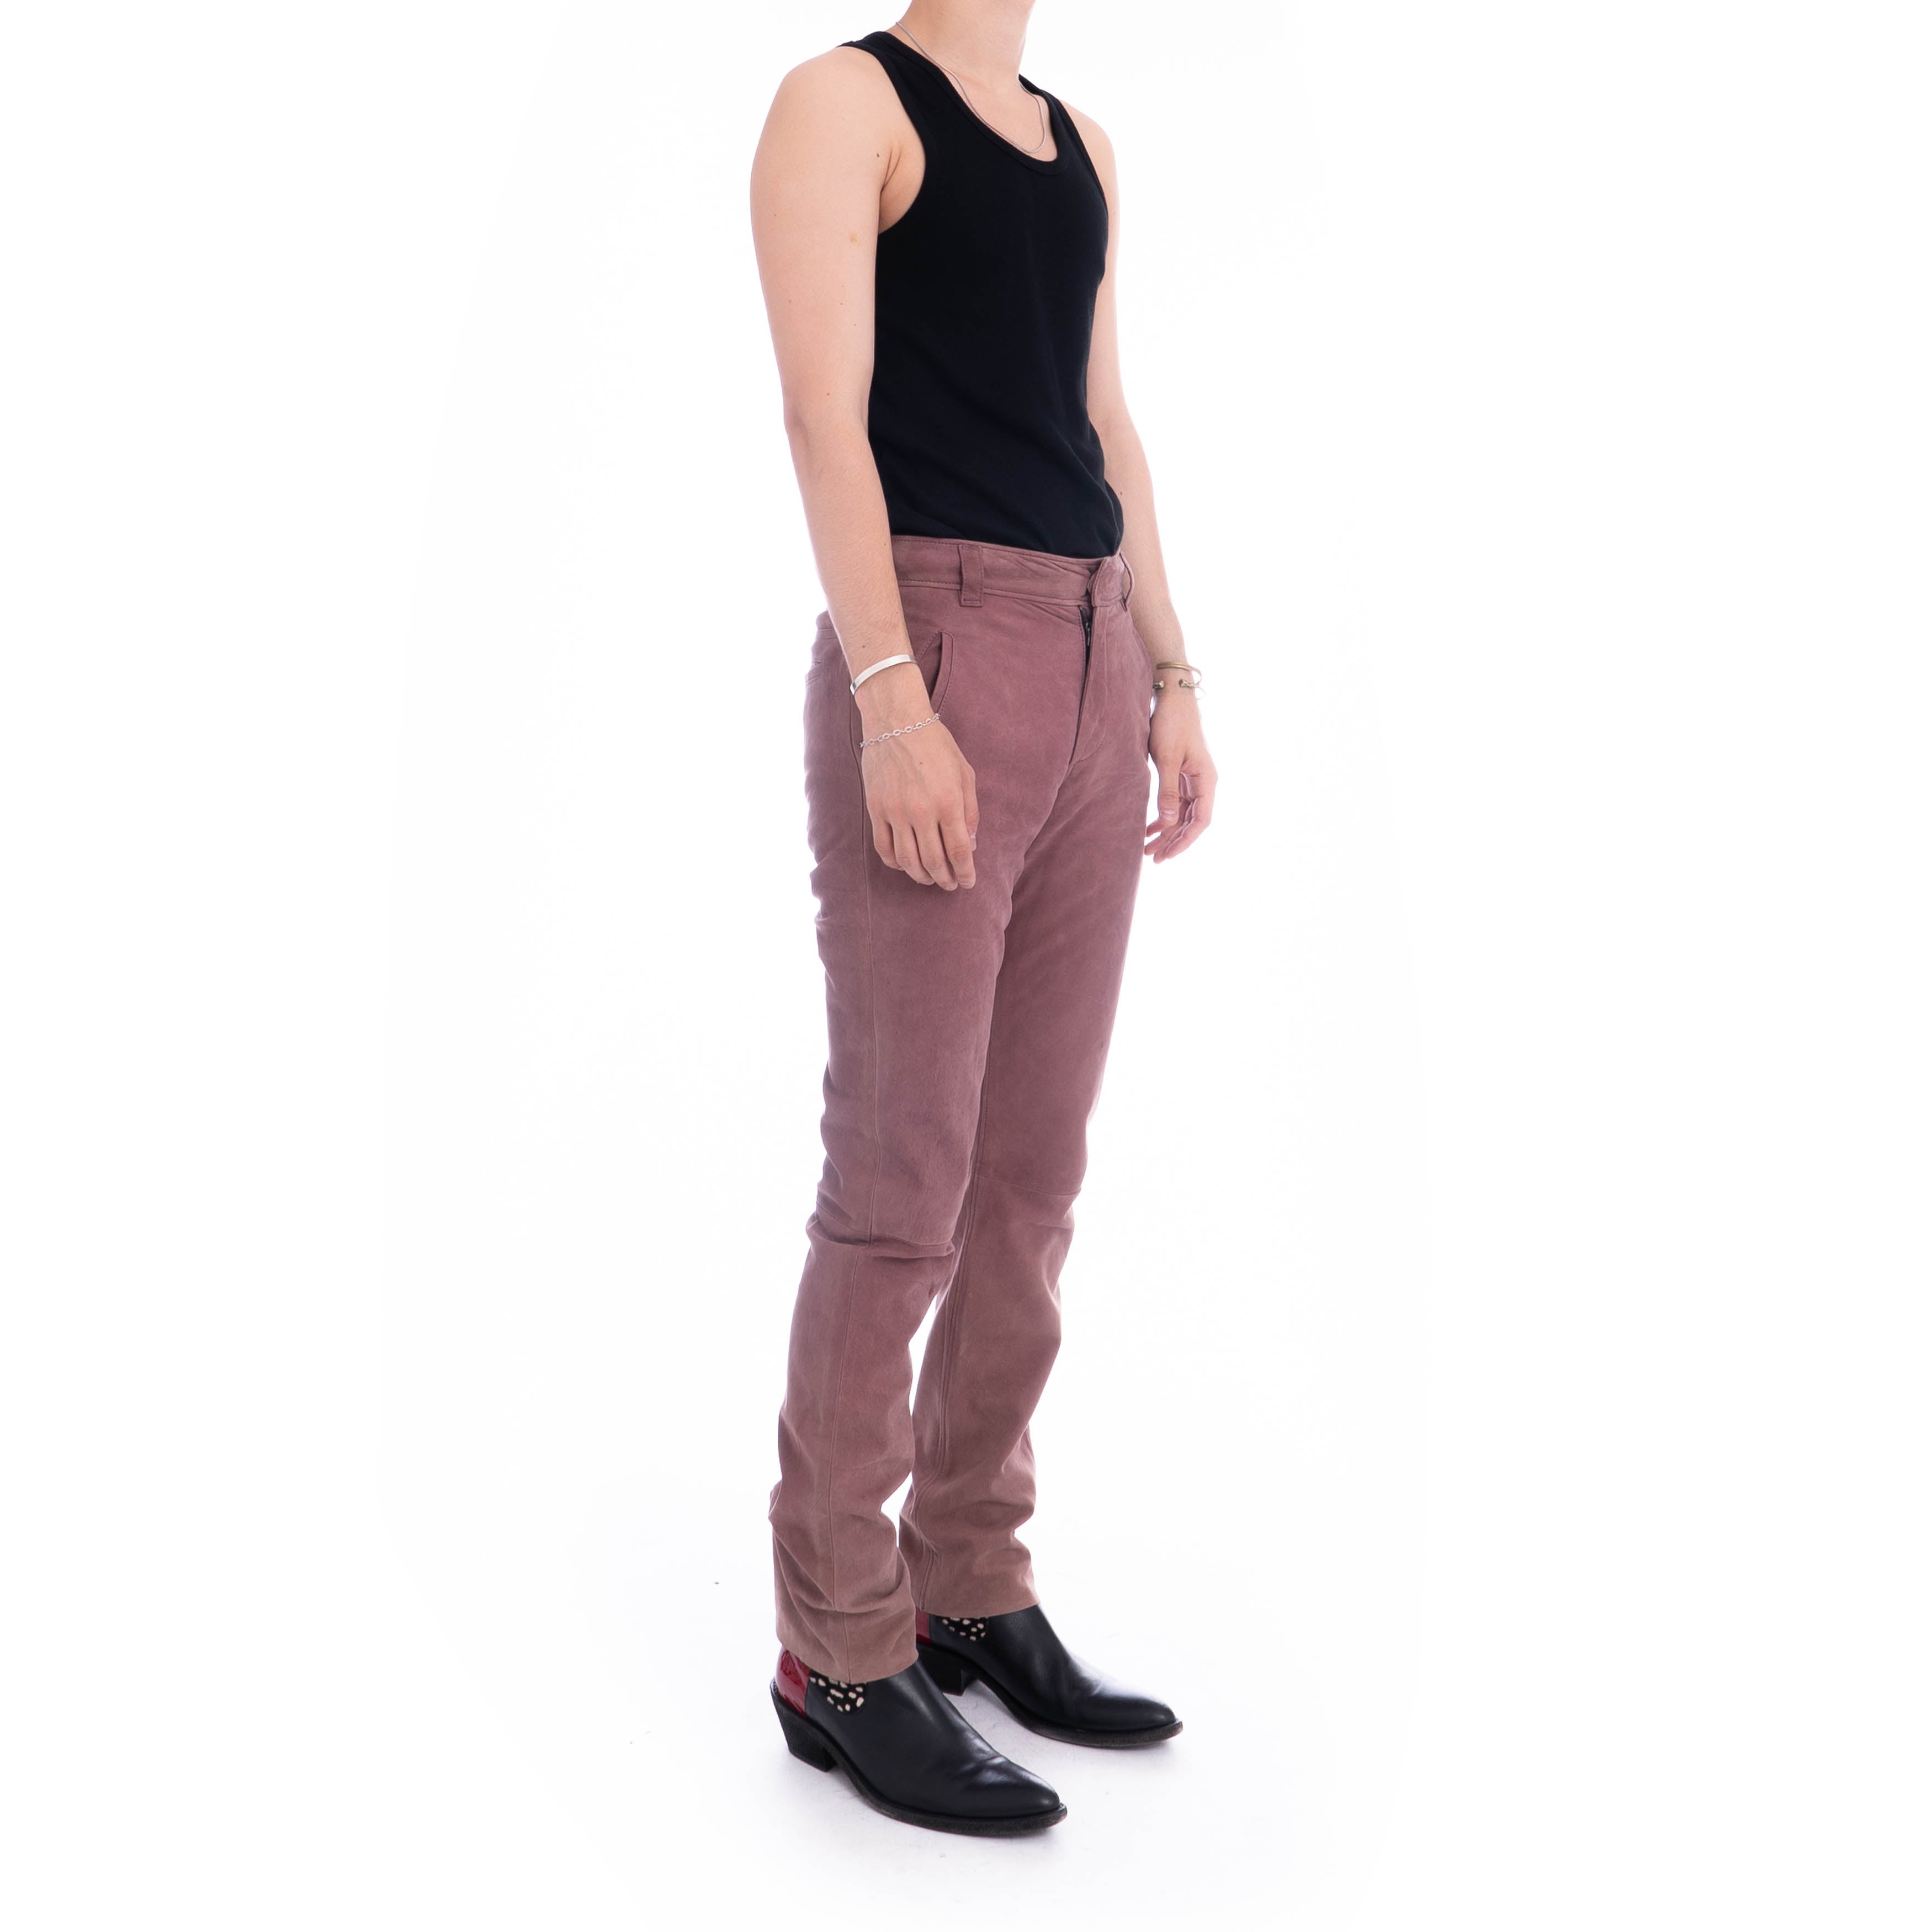 SS11 Rose Lamb Leather Trousers